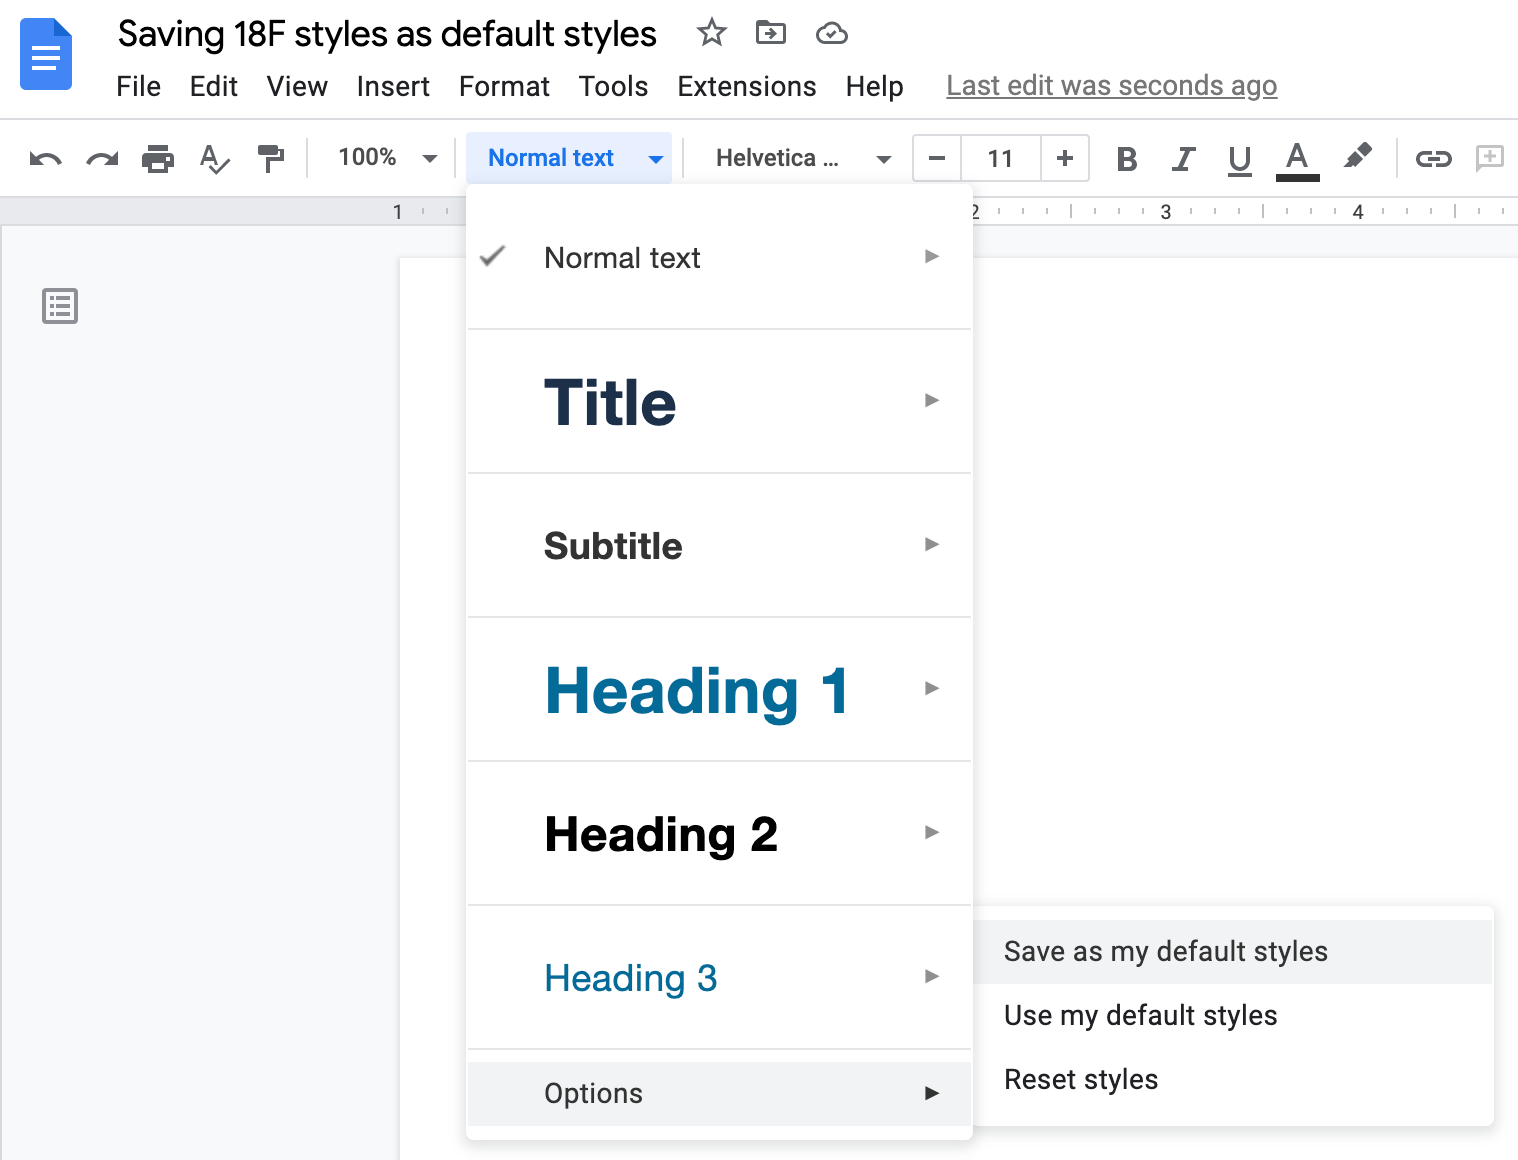 Screenshot showing how to save 18F styles as default styles in Google Docs